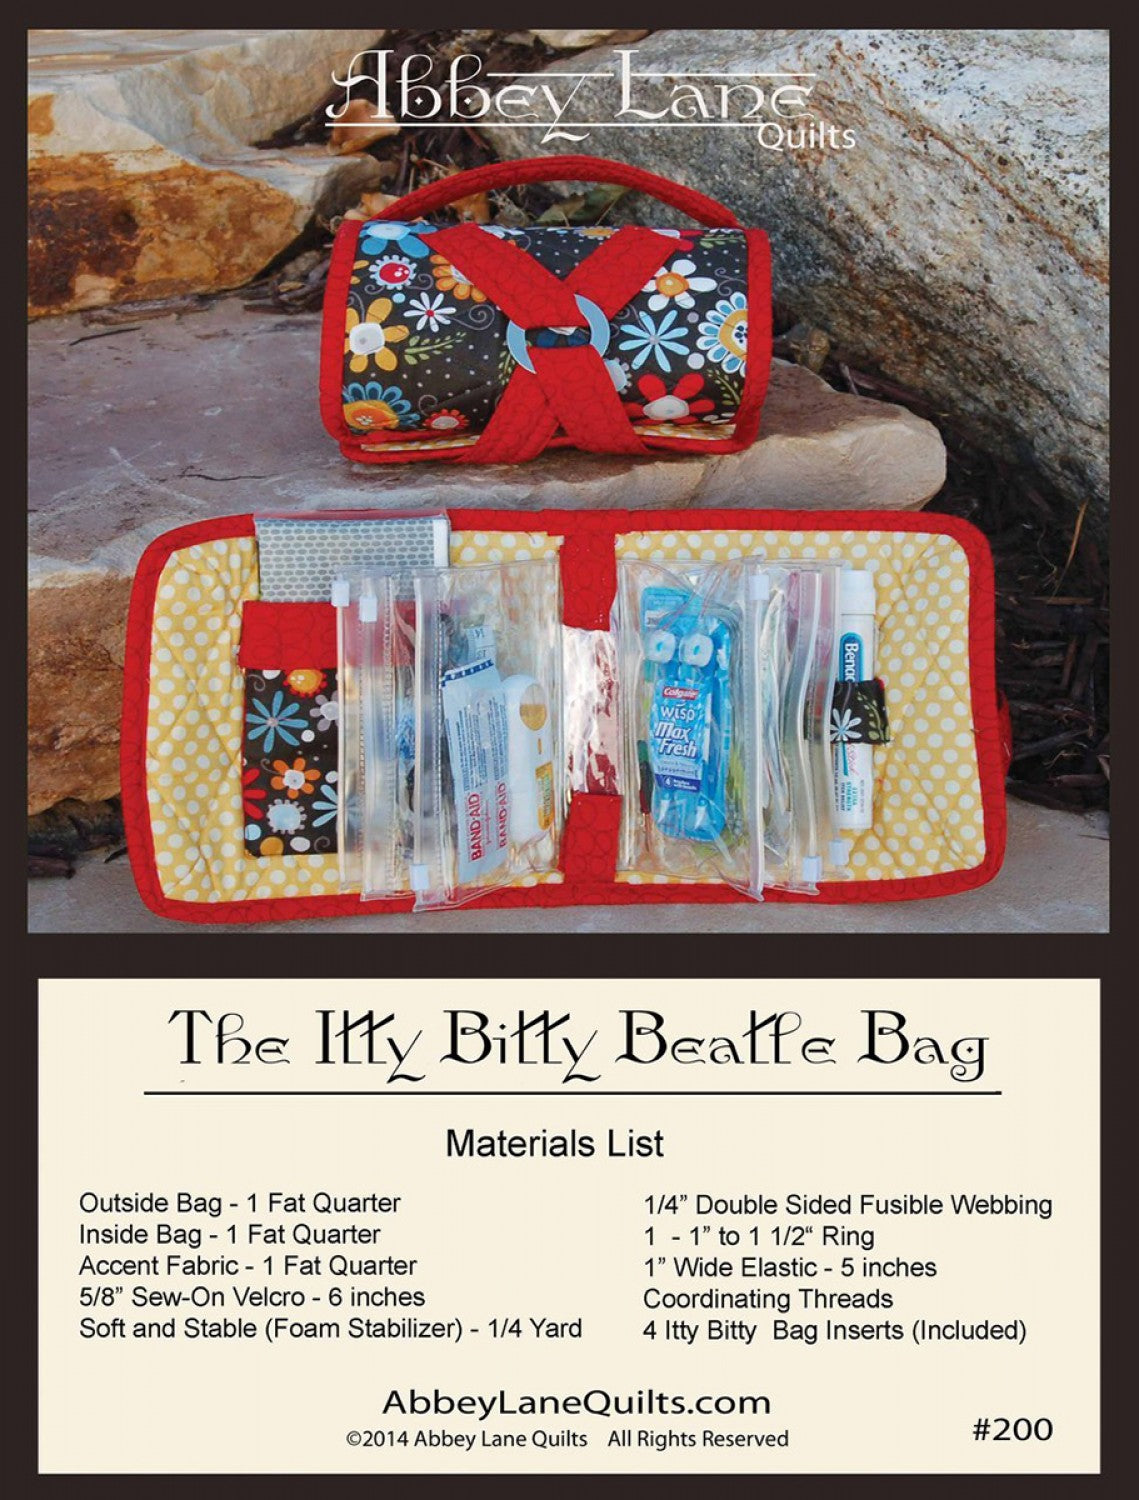 Itty Bitty Beatle Bag Sewing Pattern with Inserts by Marcea Owen and Janice Liljenquist for Abbey Lane Quilts